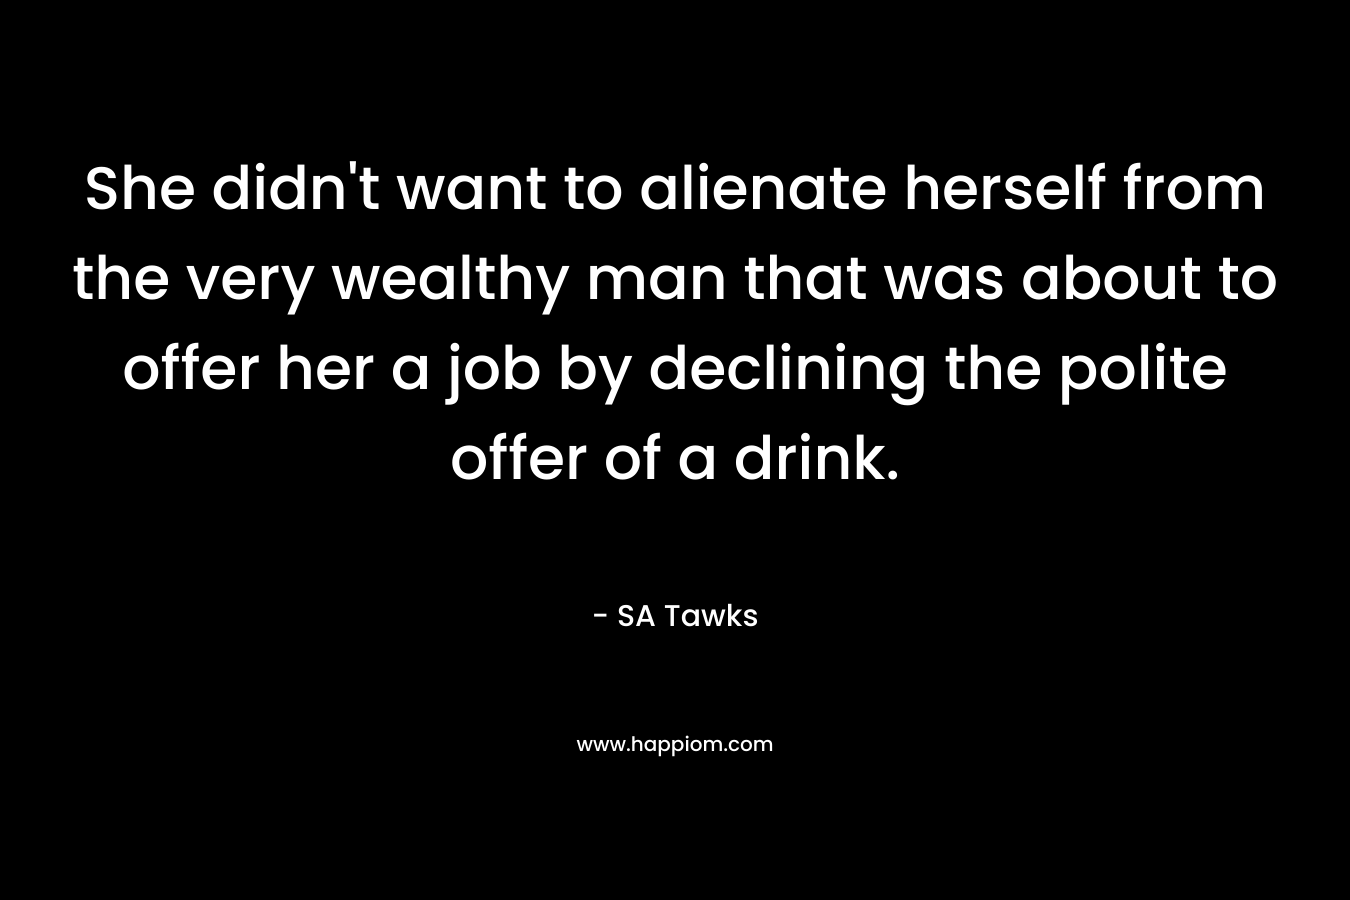 She didn’t want to alienate herself from the very wealthy man that was about to offer her a job by declining the polite offer of a drink. – SA Tawks